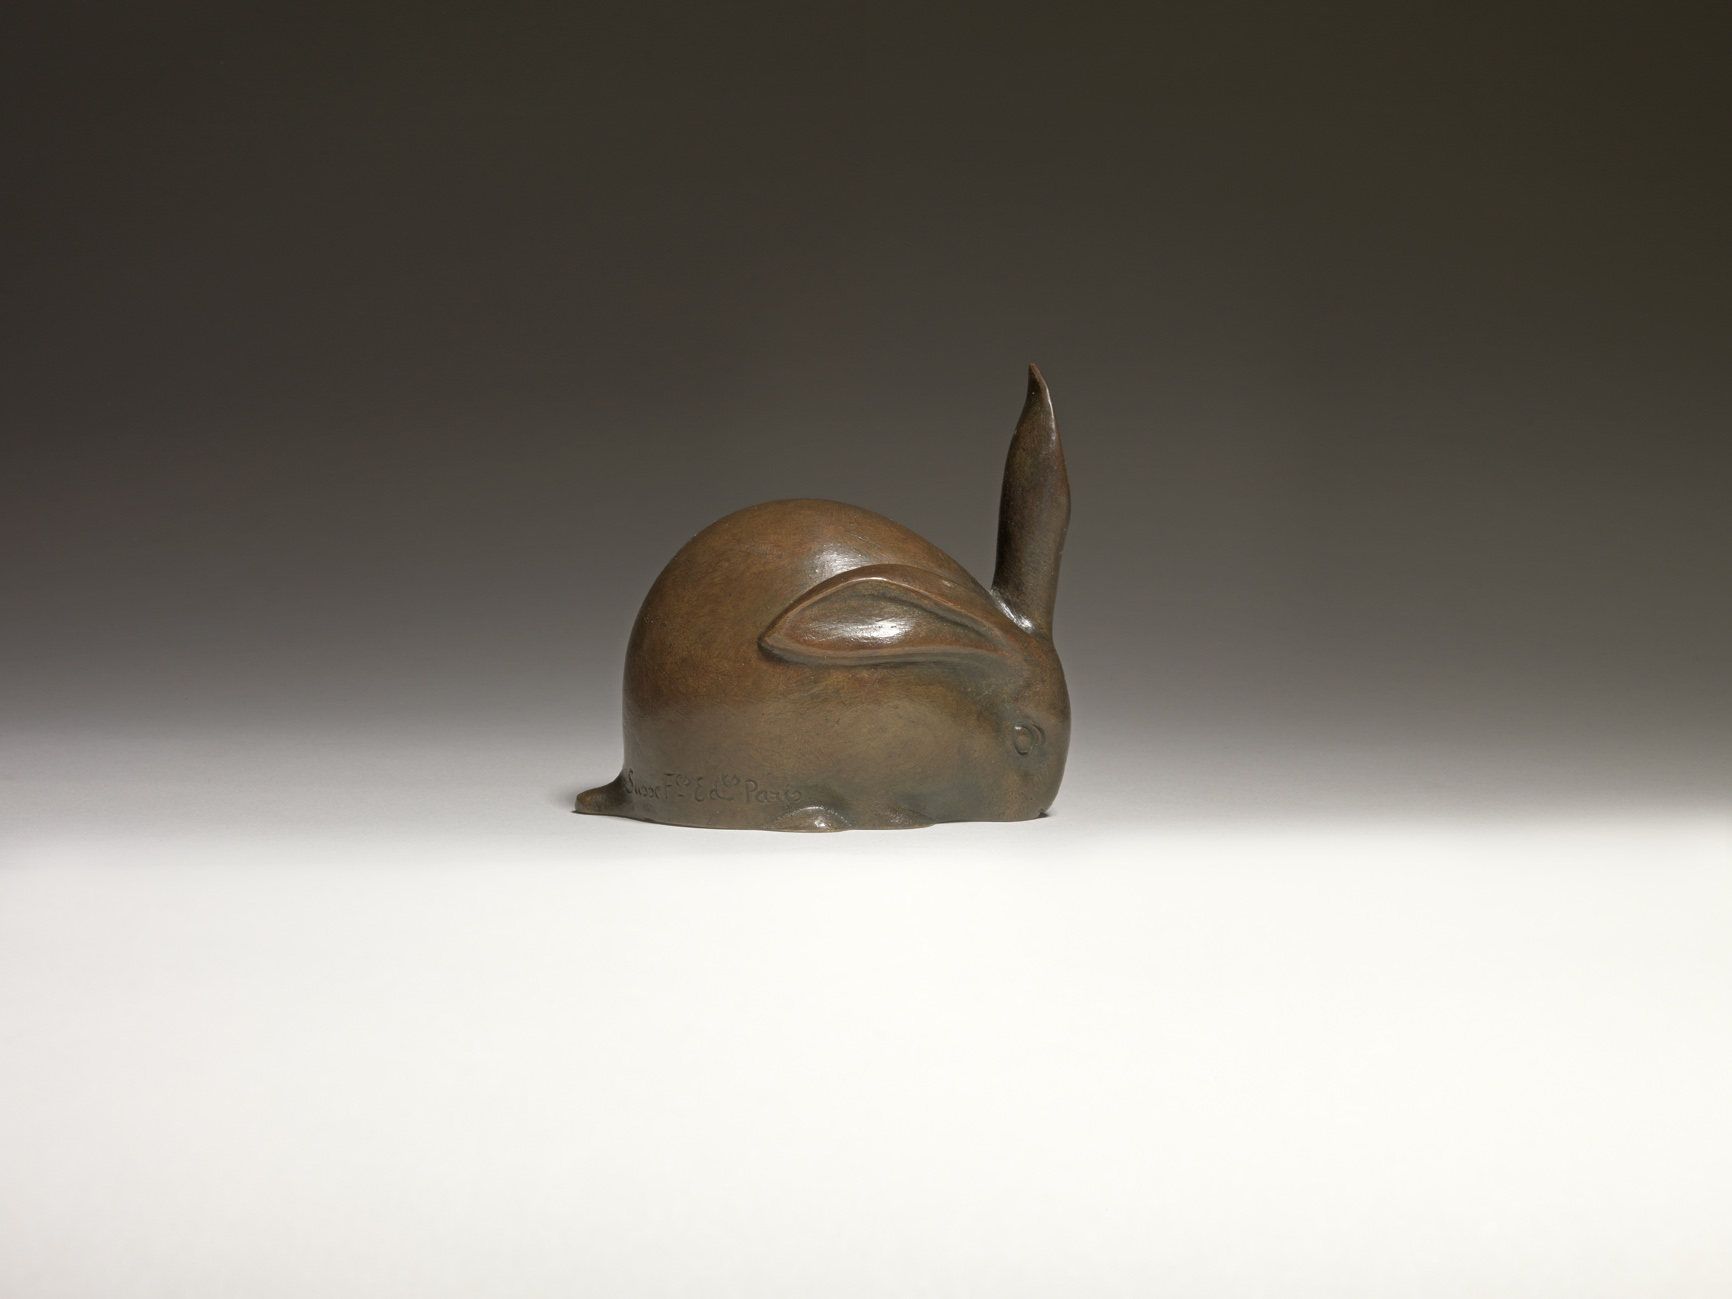 Crouching Rabbit with one Ear Up, c. 1919